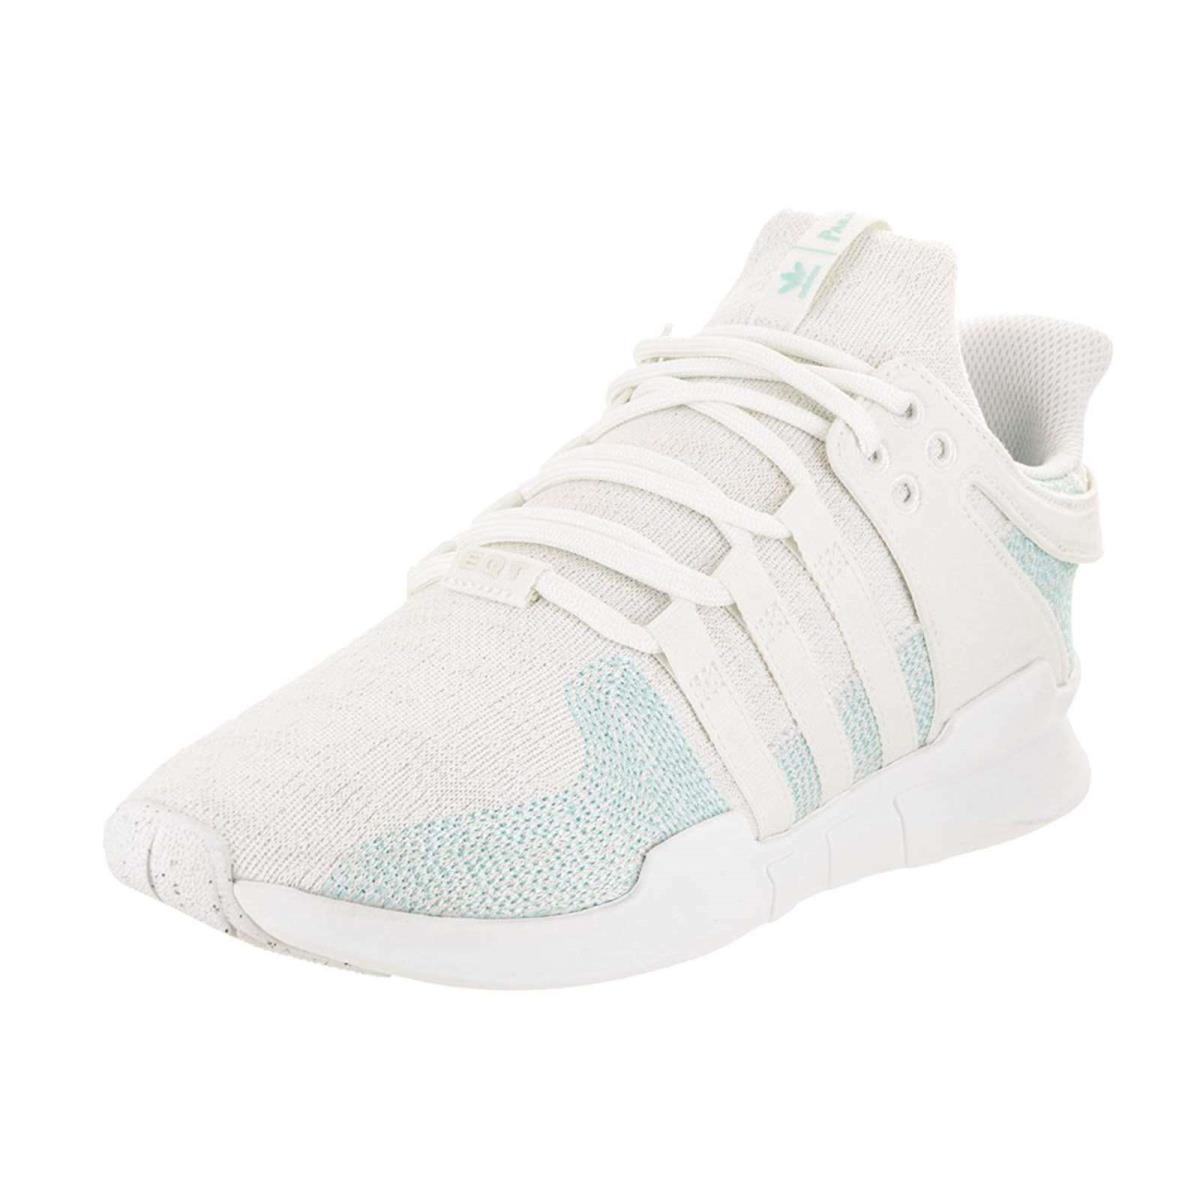 Adidas Men s Athletic Shoes Eqt Support Adv CK Parley Running Sneakers White